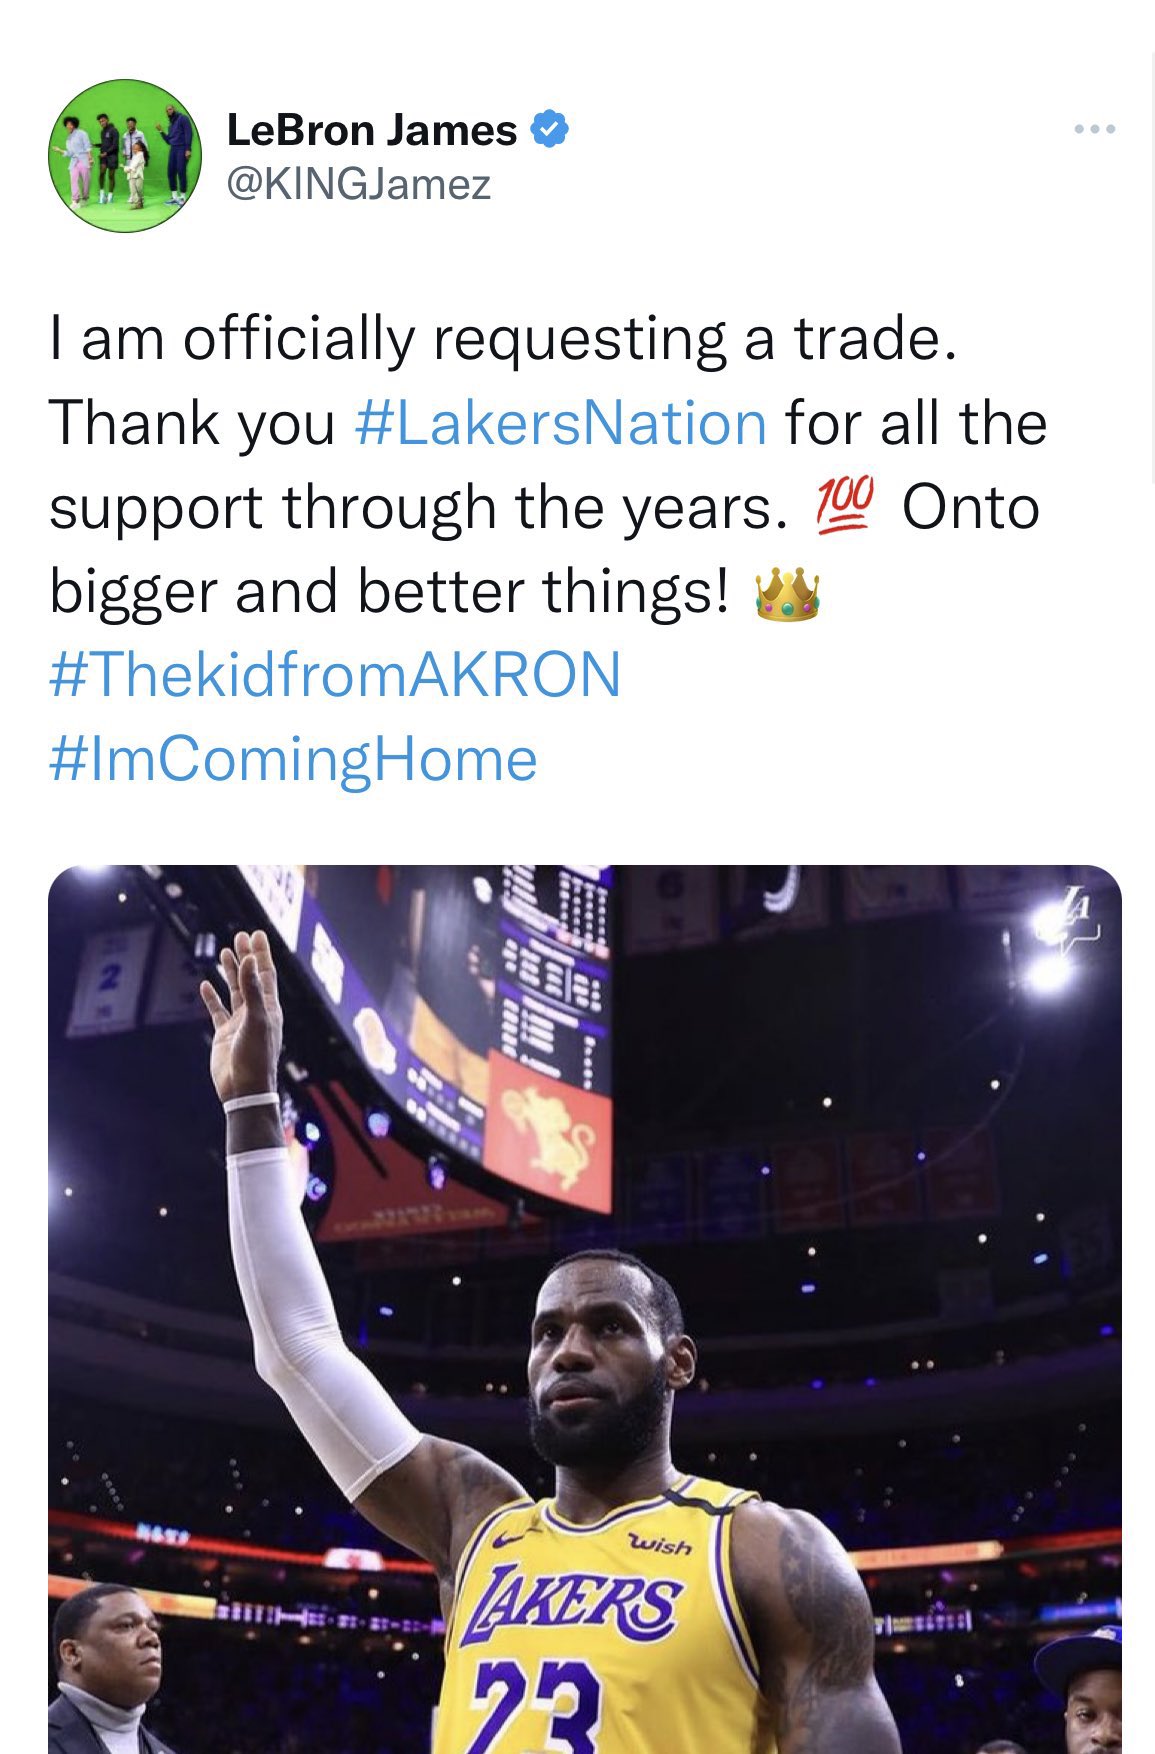 fake twitter posts - lakers - LeBron James > I am officially requesting a trade. Thank you for all the support through the years. 100 Onto bigger and better things! Home Ei wish Akers 23 Visits